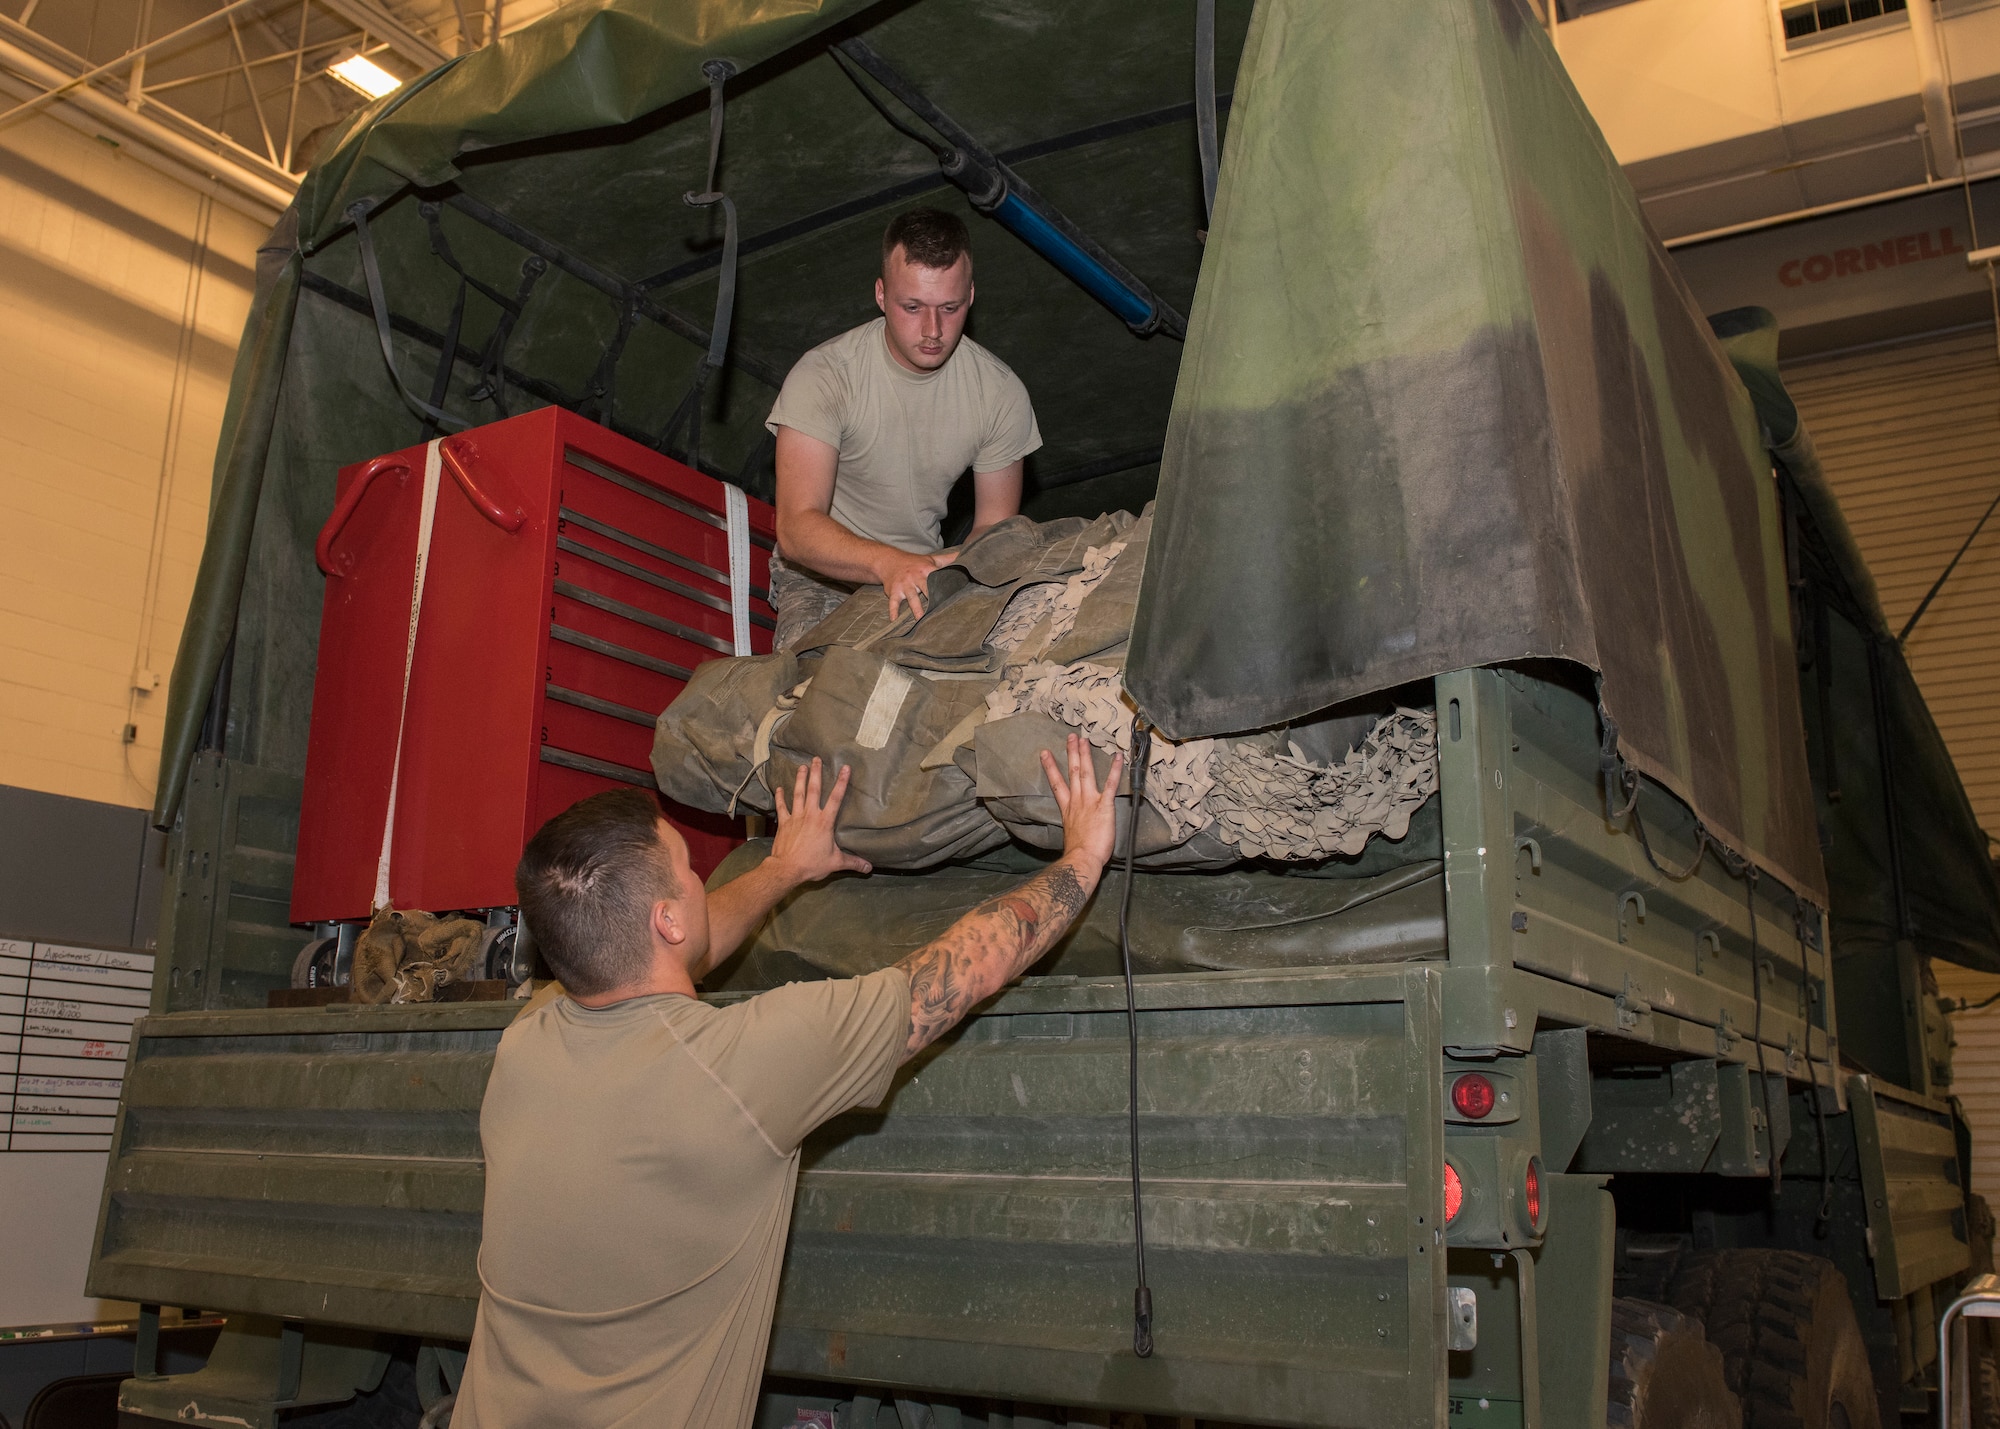 Senior Airman Tyler Duggar, 726th Air Control Squadron, and Senior Airman Randy Johnston, 726th ACS, load suppliies onto a Medium Tactical Vehicle in preparation for an exercise July 7, 2019, at Mountain Home Air Force Base, Idaho. The 726th ACS Conducts deployment exercises in order to increase their mission readiness. (U.S. Air Force photo by Senior Airman Tyrell Hall)